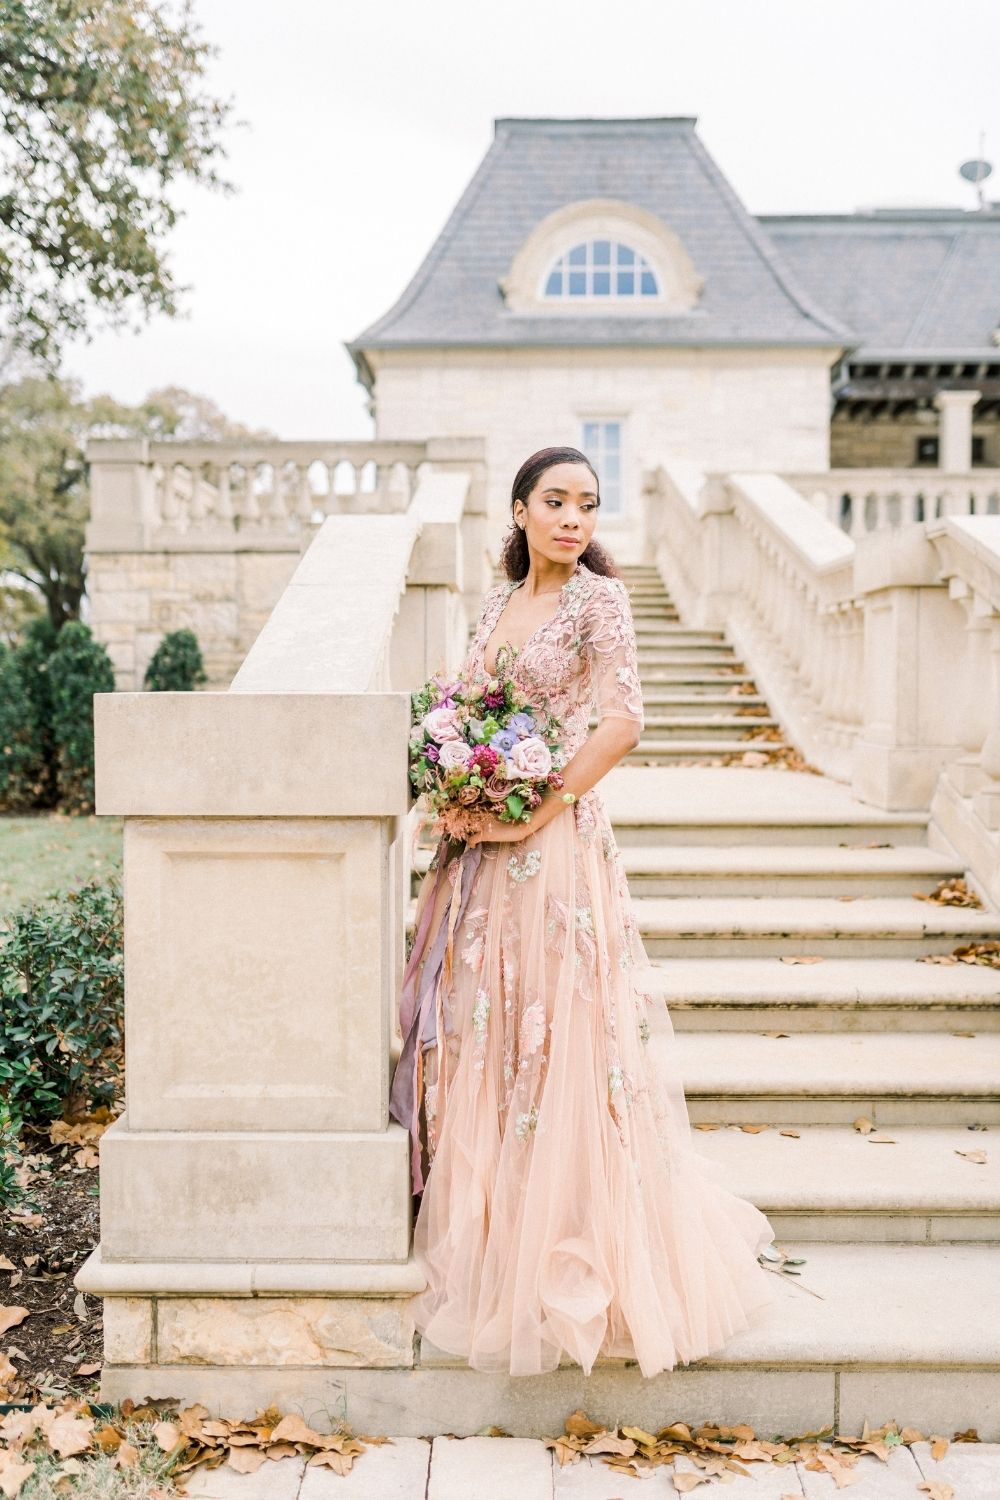 Bride in a pink blush A-line wedding dress with floral details